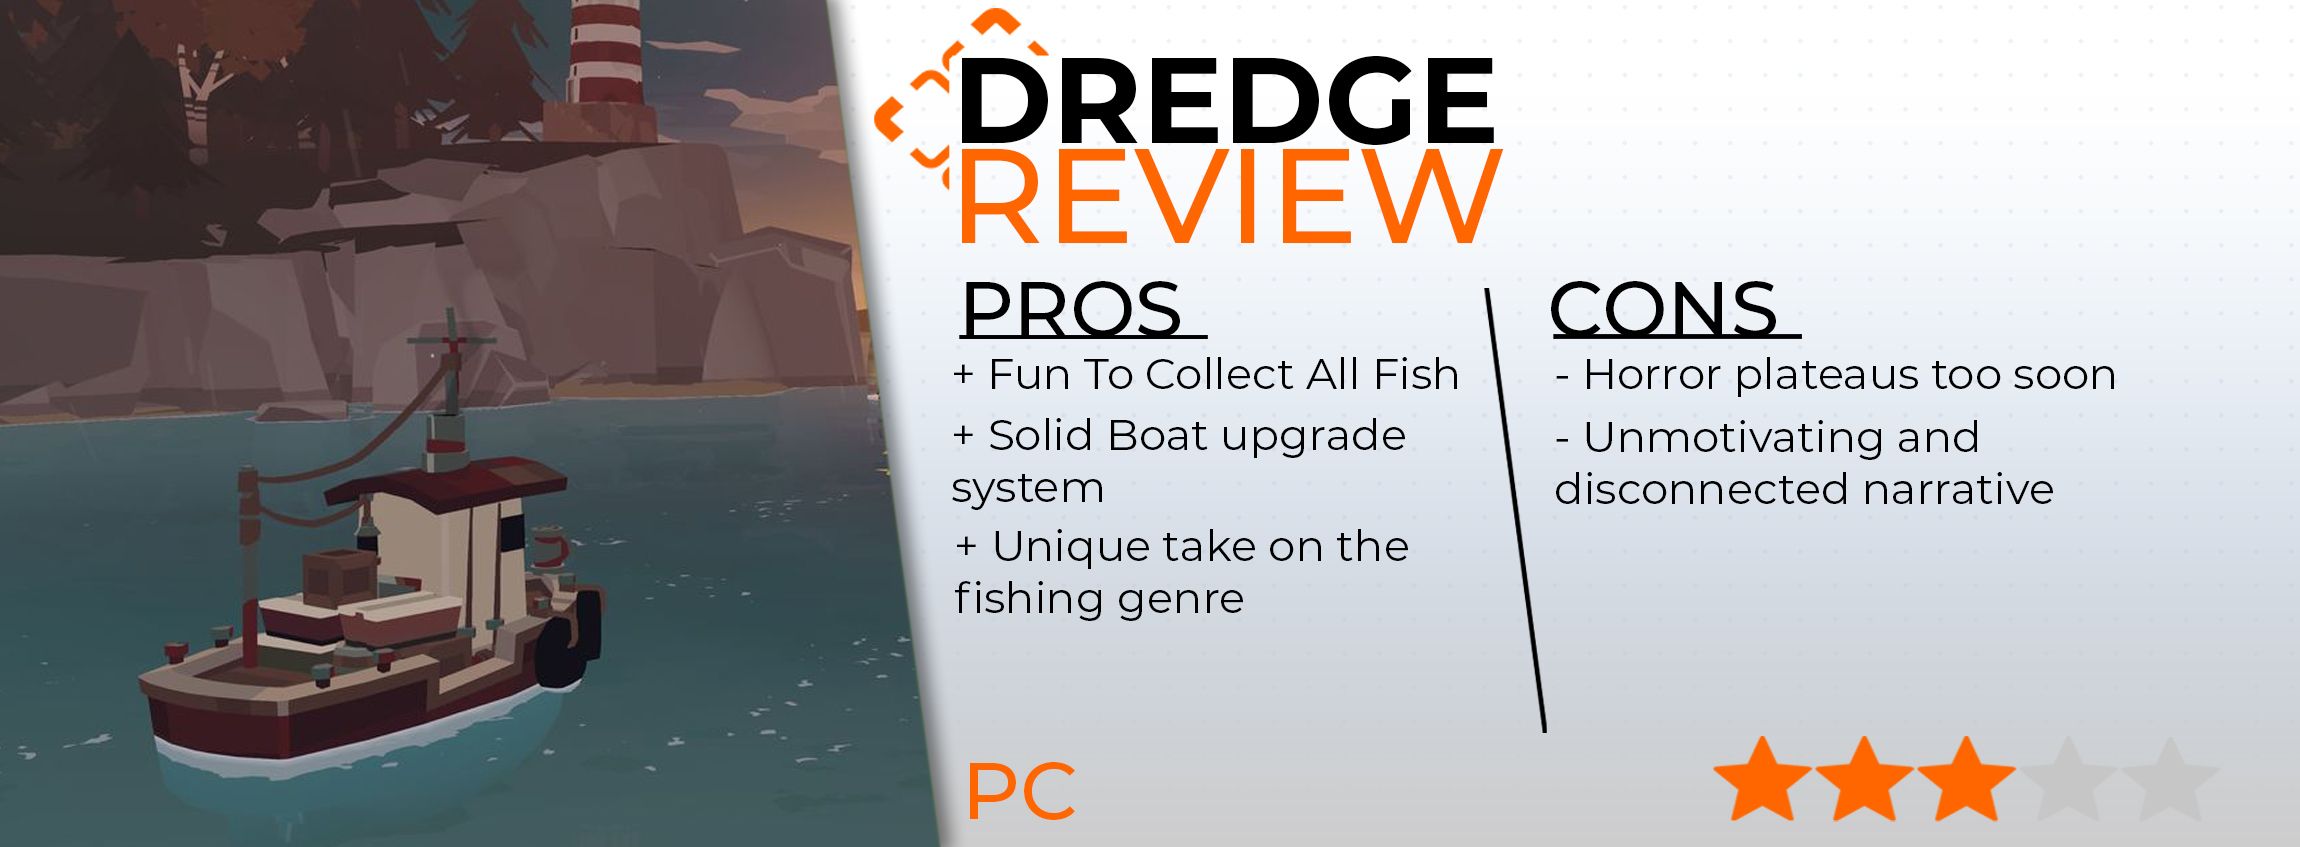 Dredge review card listing pros and cons